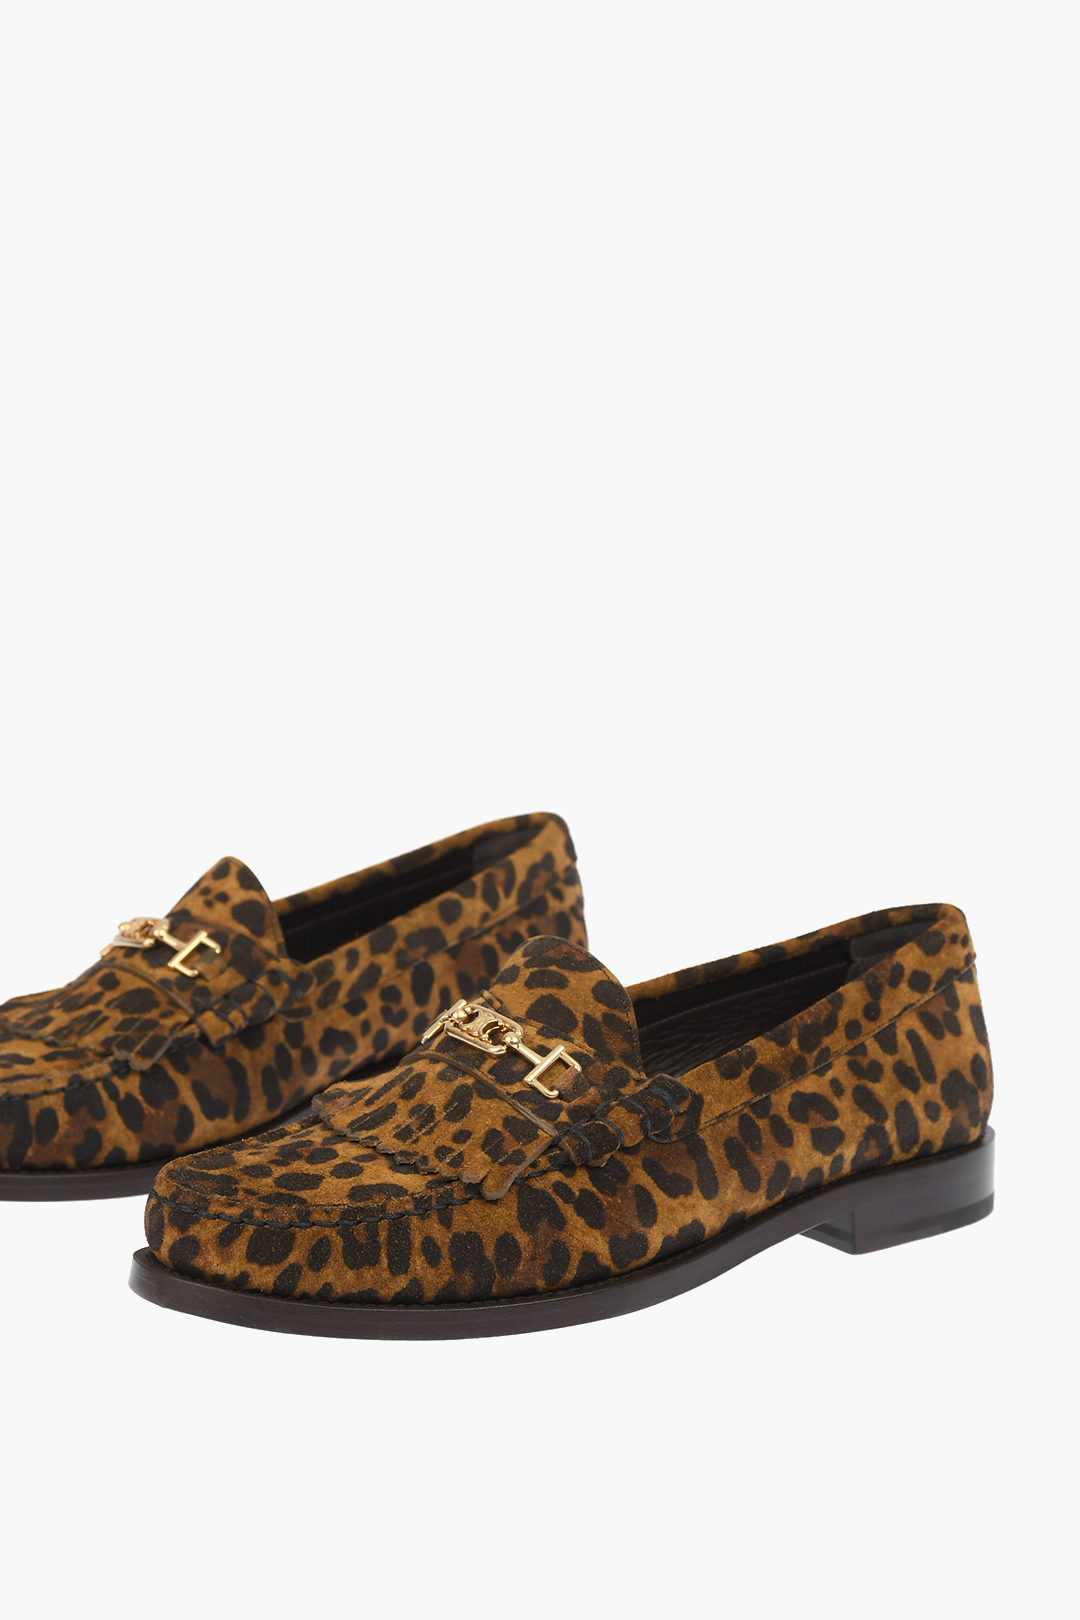 Celine Leopard Printed Suede Leather Loafers with Triomphe Glamood Outlet